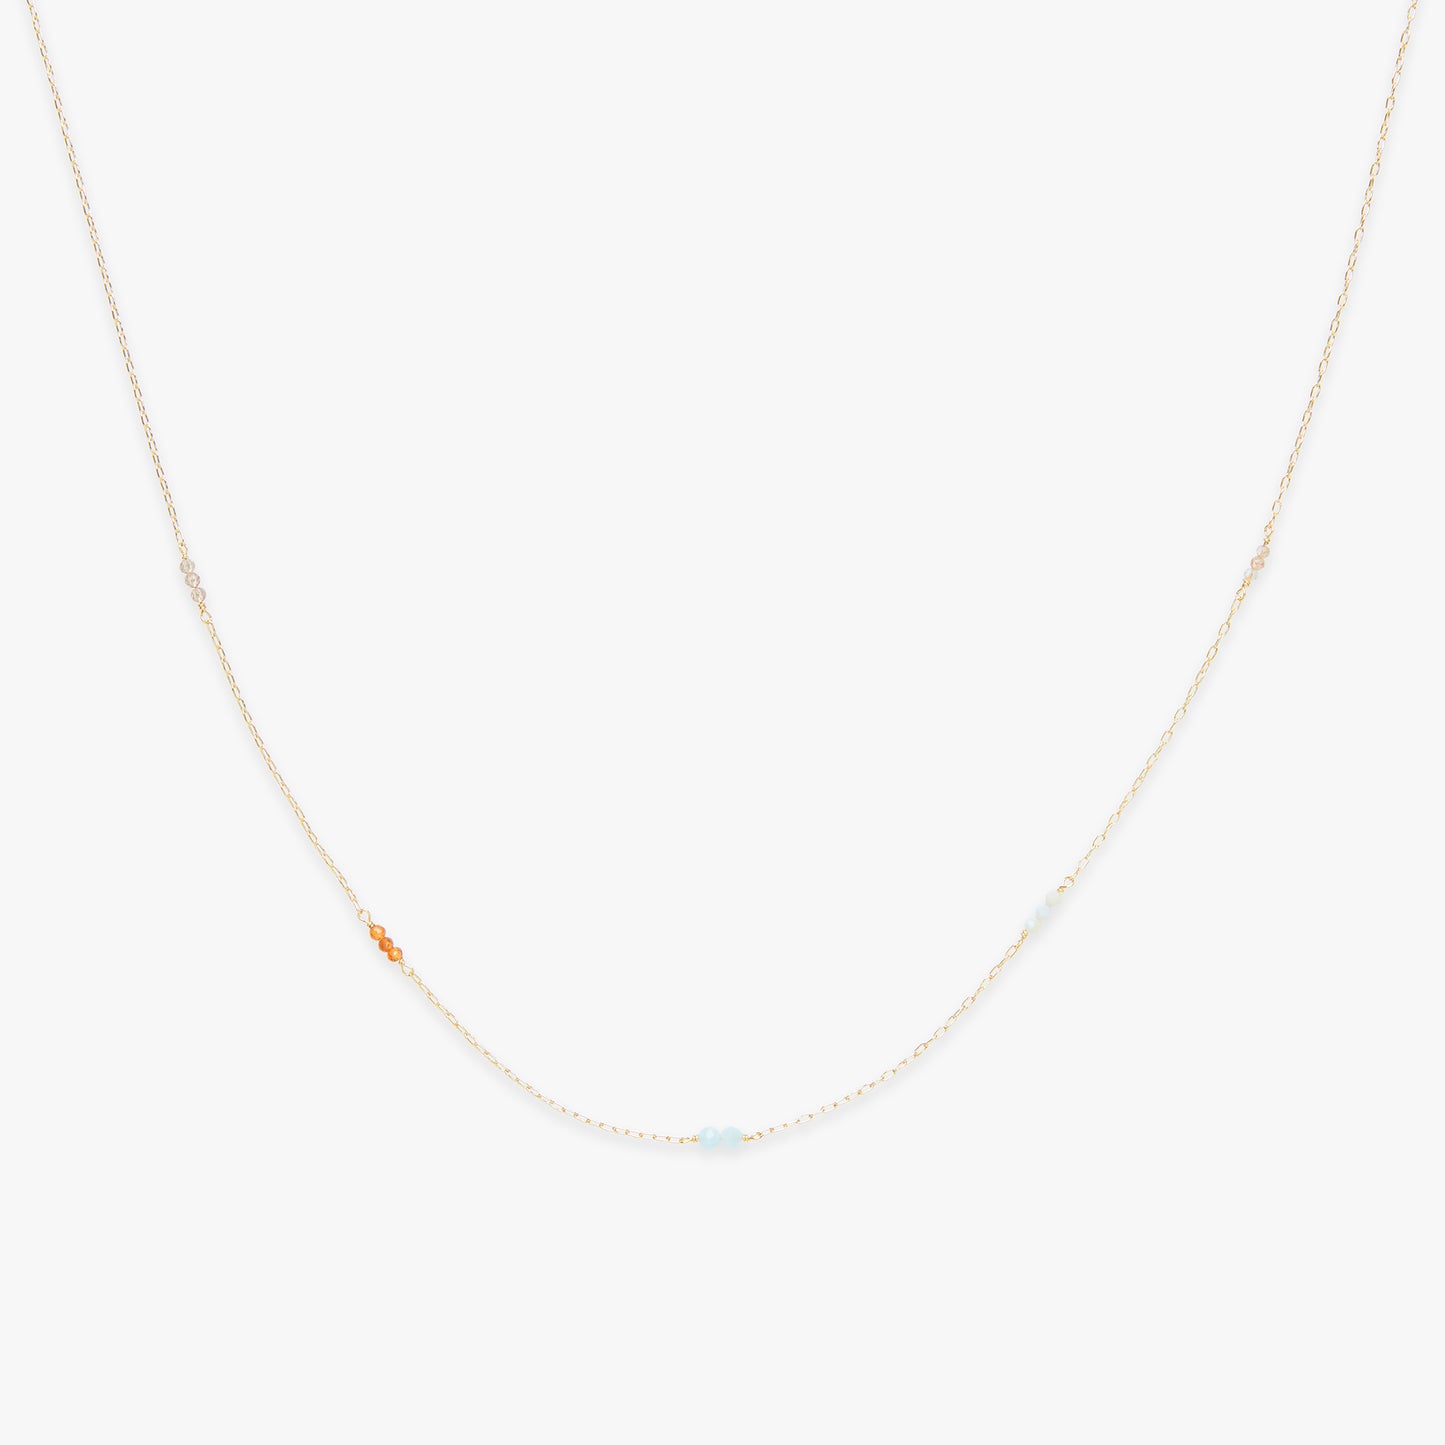 Candy Sunset palette necklace gold filled